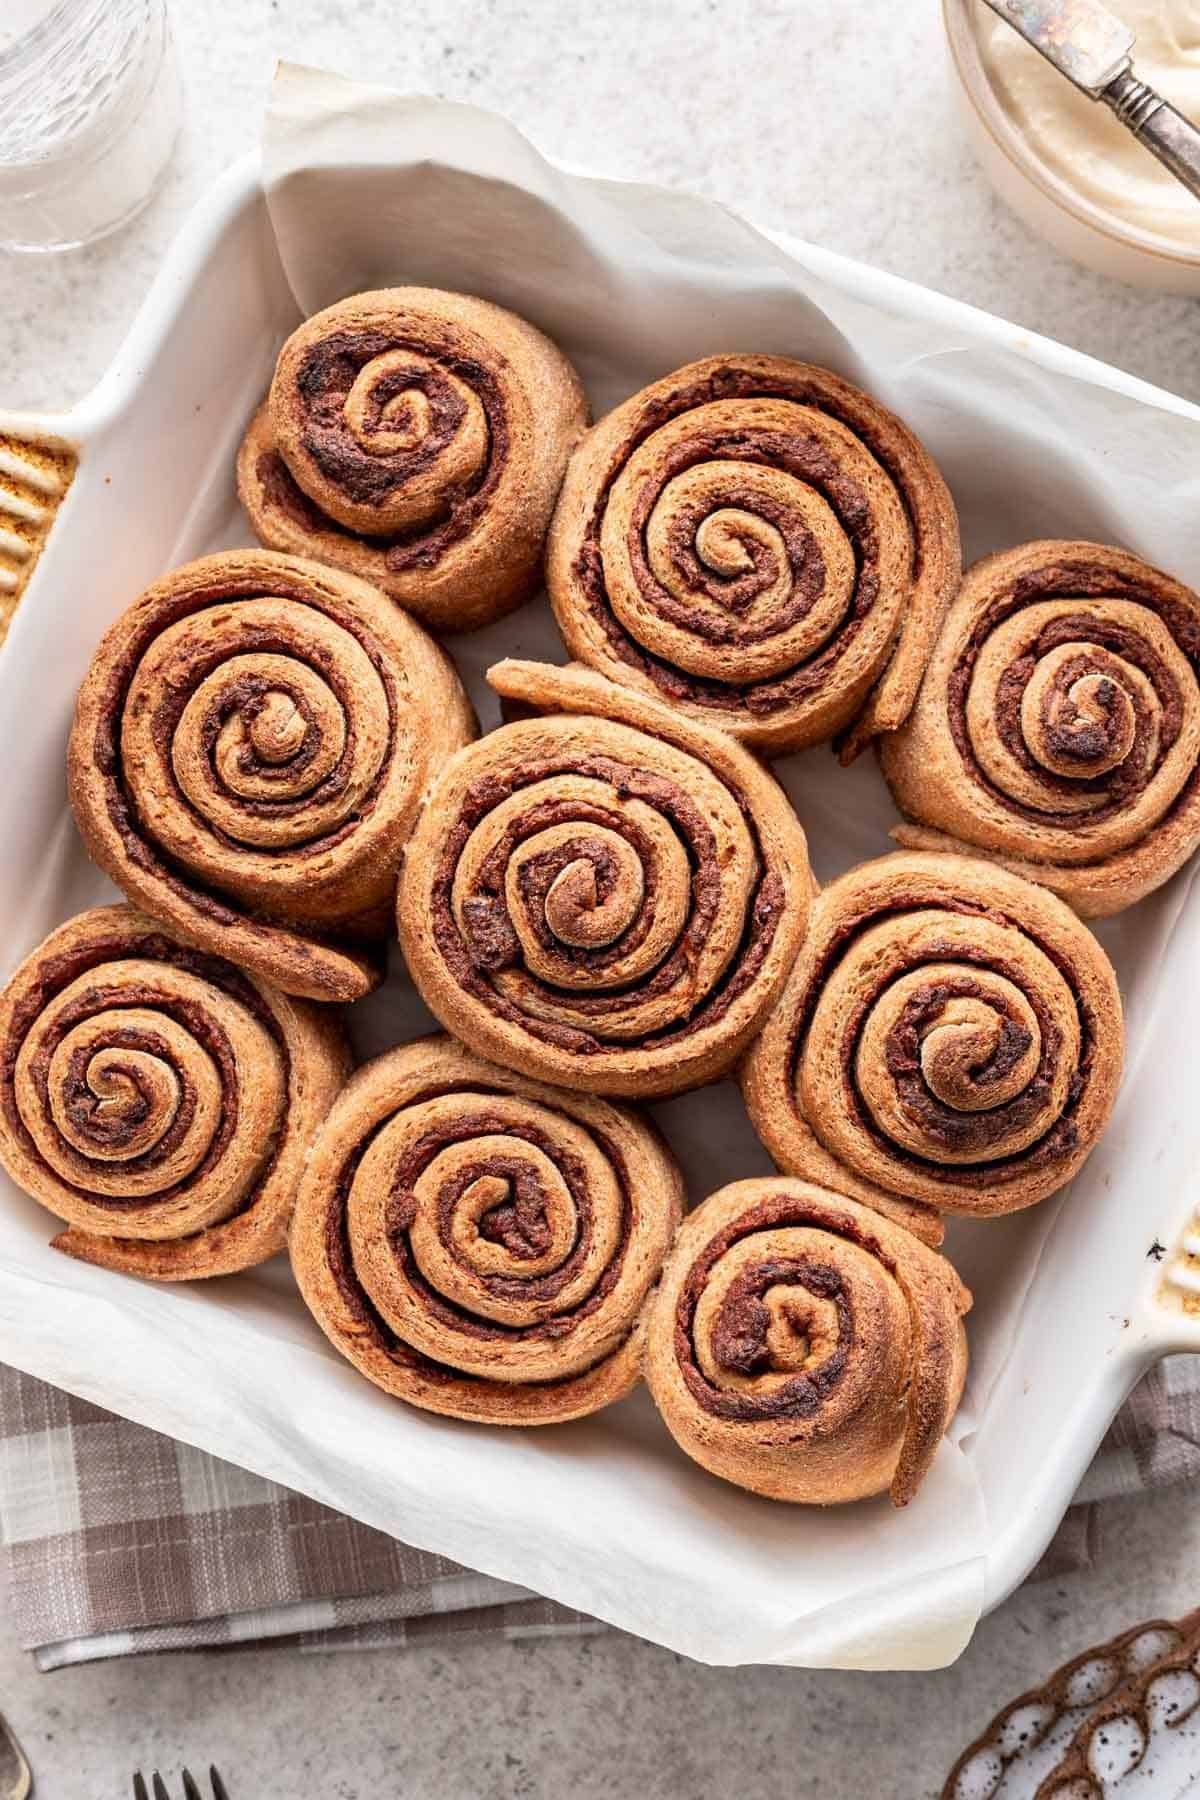 Baked whole wheat cinnamon rolls in a white, square baking dish.